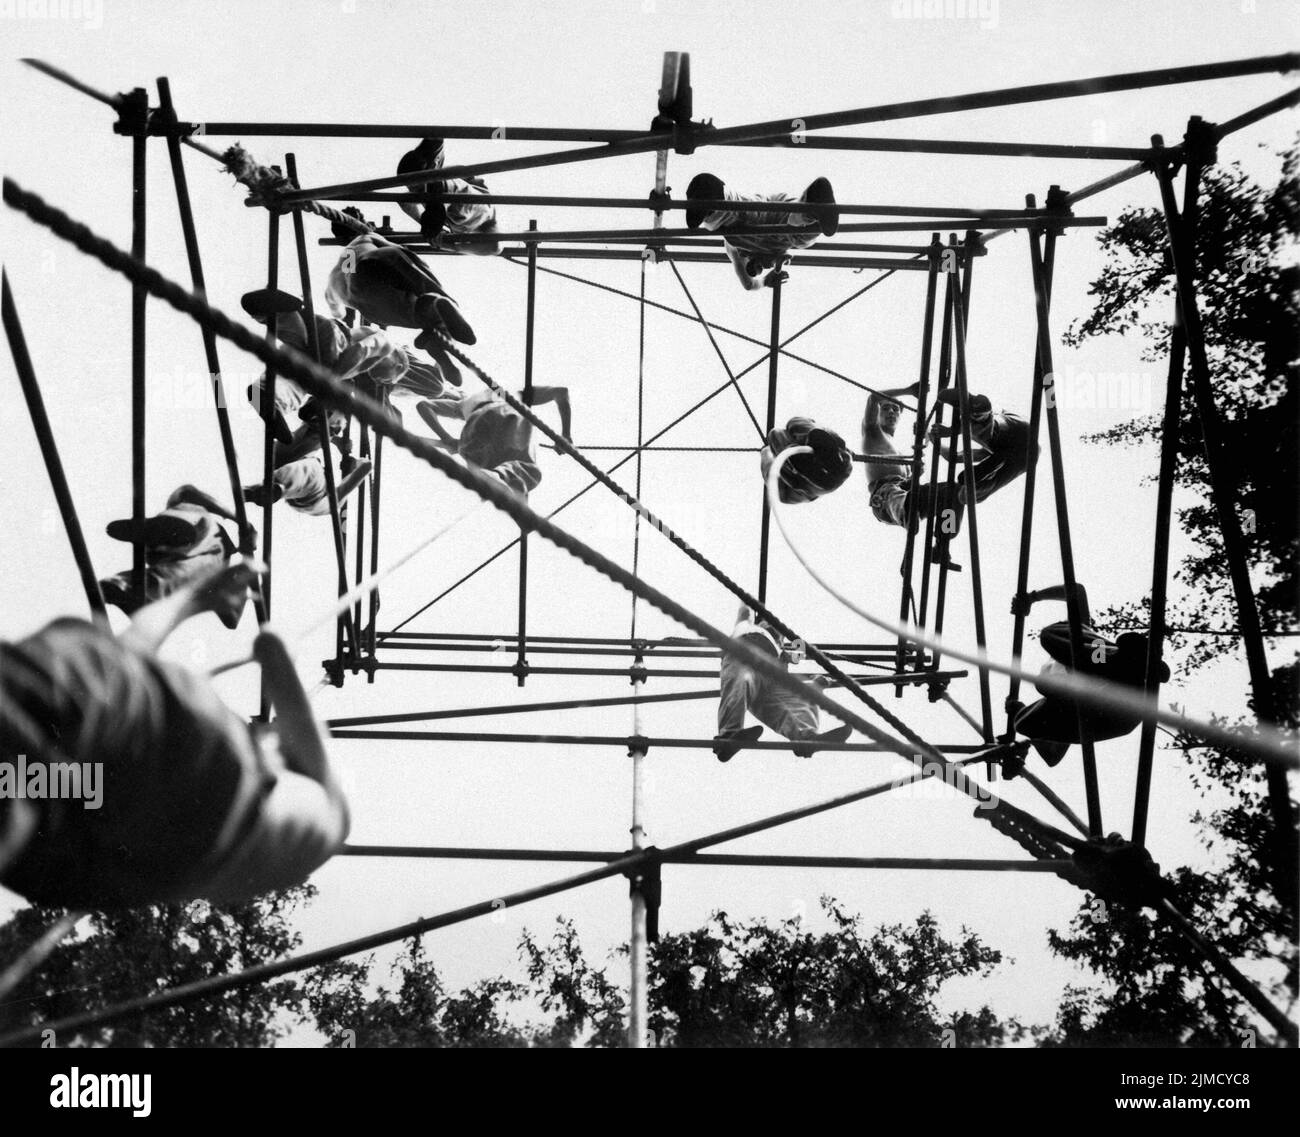 Special forces, led by the SOE (Special Operations Executive) were trained as special agents to be parachuted into France to help co=odinate the Allied war effort with the French resistance. The opearation was called Operation Jedburgh and the soldiers were known as Jedburghs, or Jeds. Here they are seen training on high bars on an obstacle course at Milton Hall Stock Photo